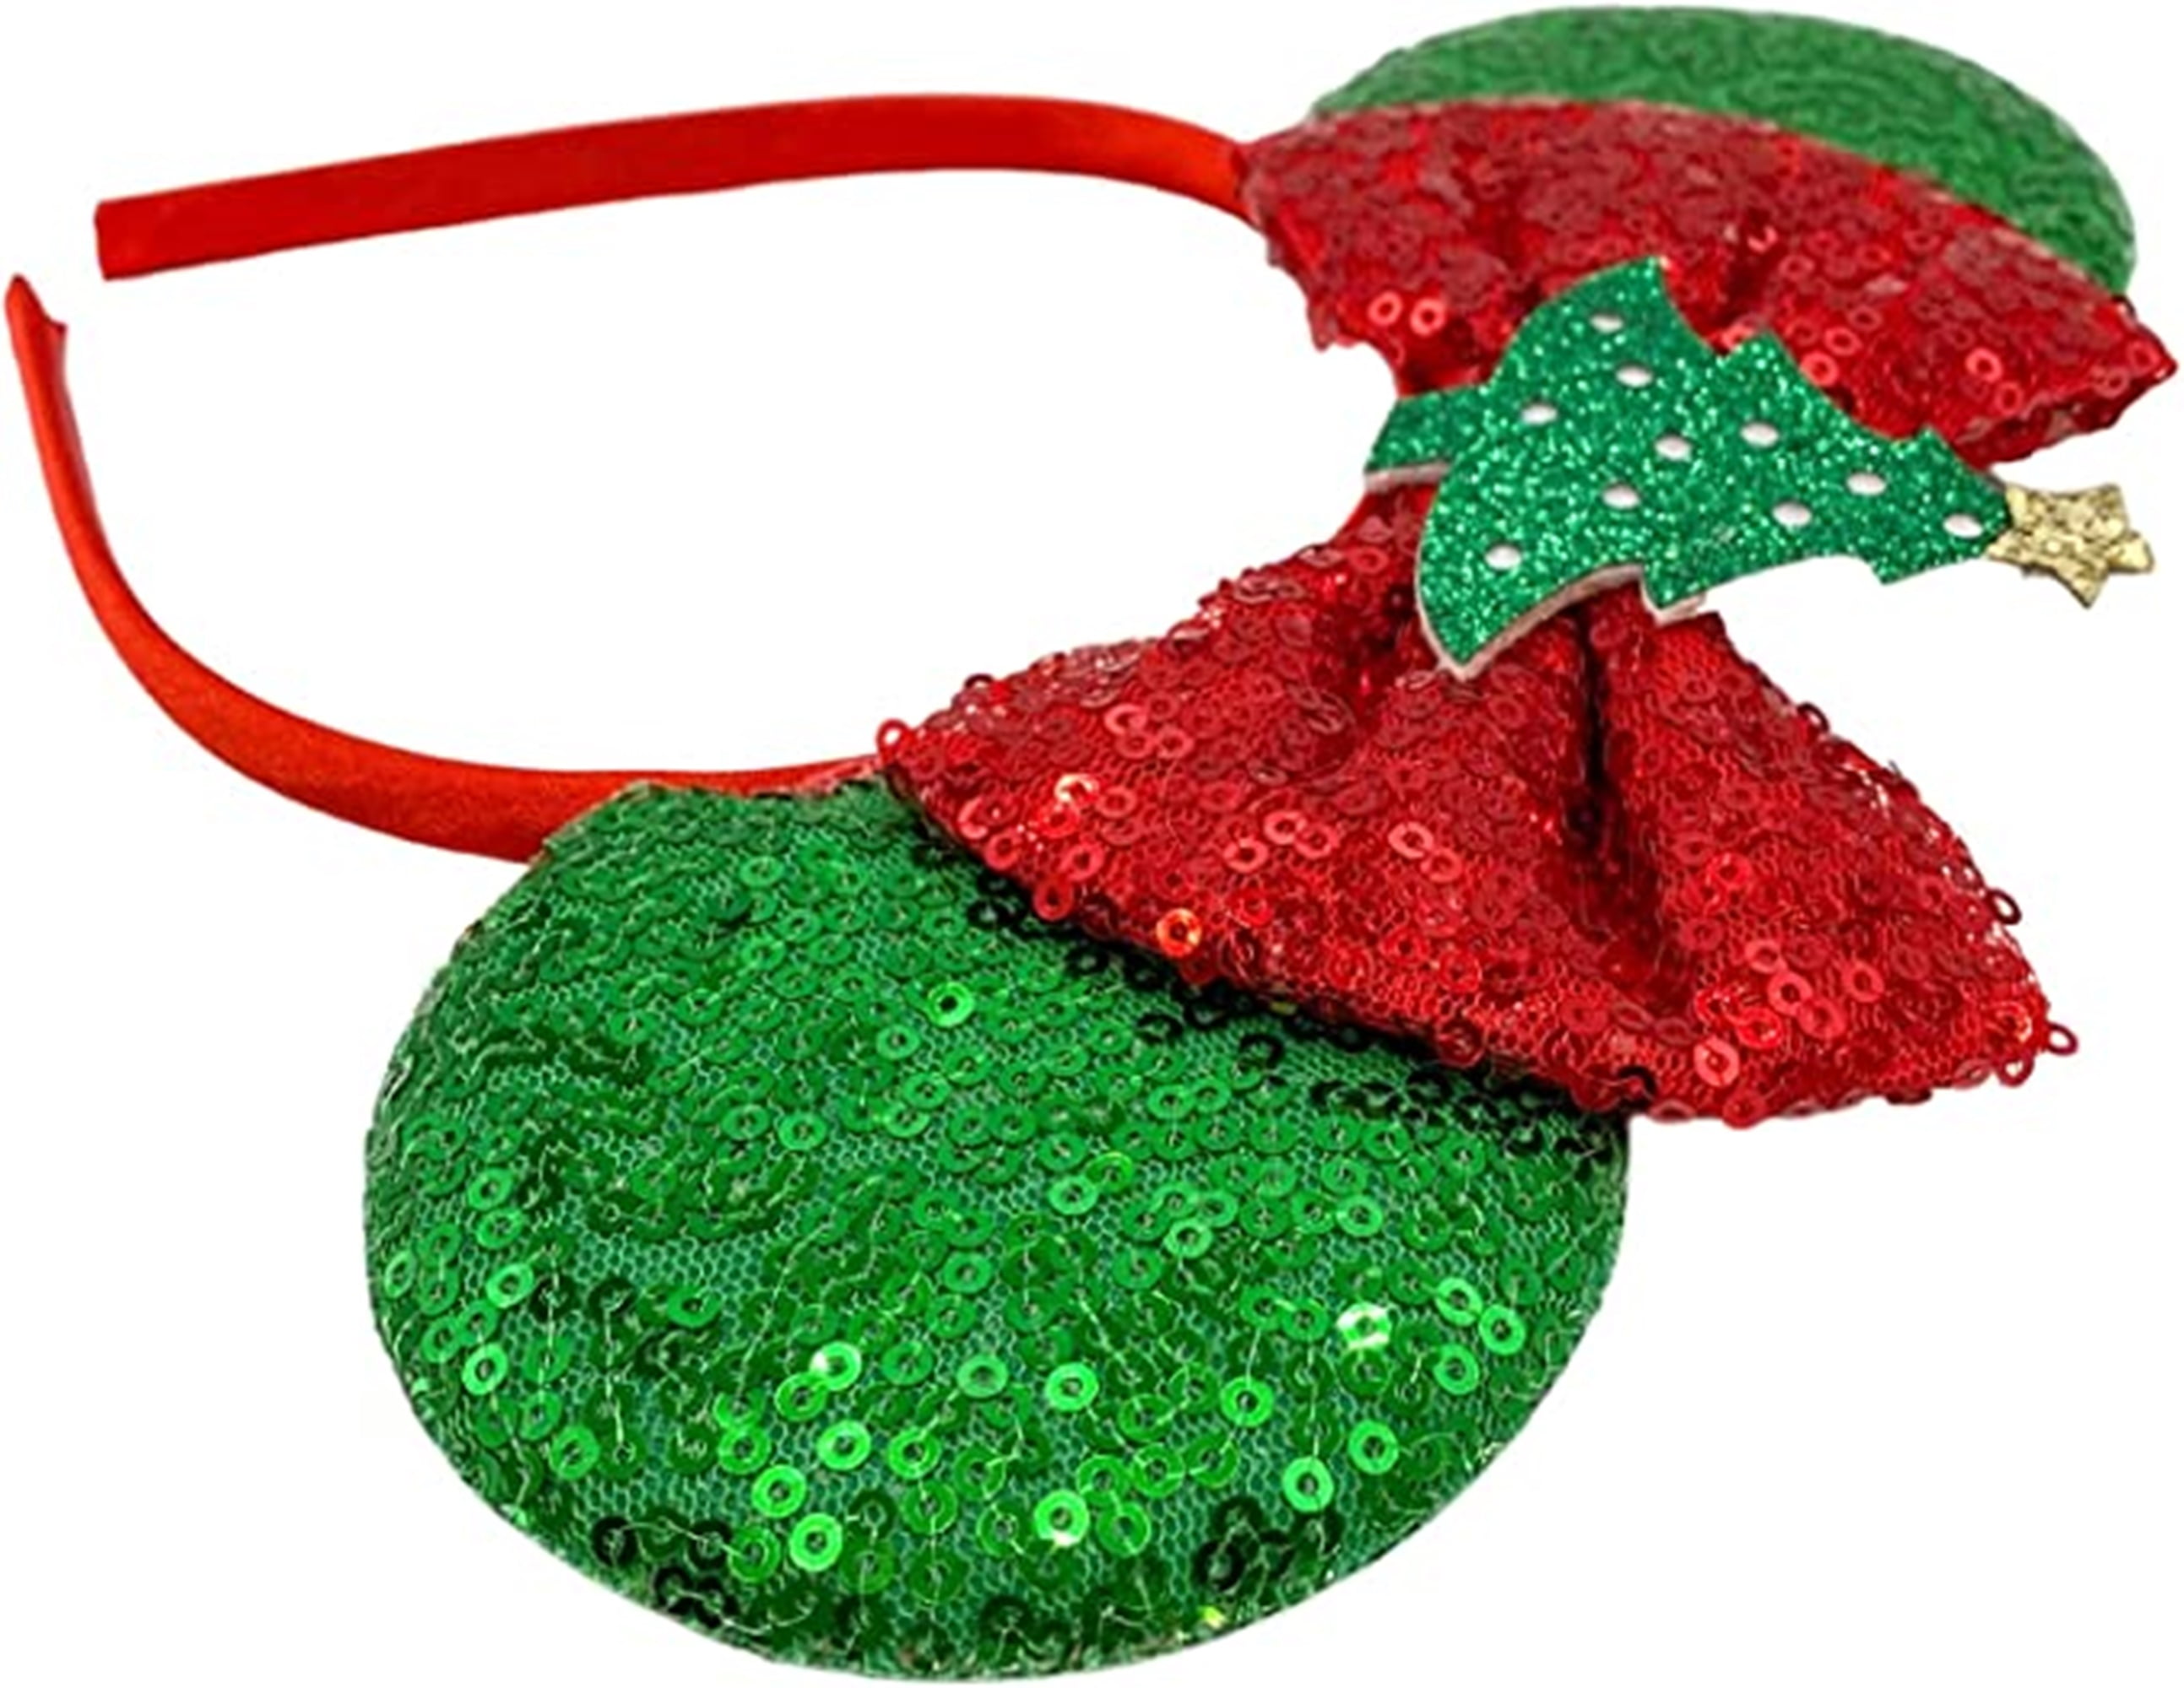 Needzo Red and White Striped Christmas Mouse Ear Headband with Green Bow, Sequin Festive Holiday Hair Accessory for Women or Girls, One Size Fits Most